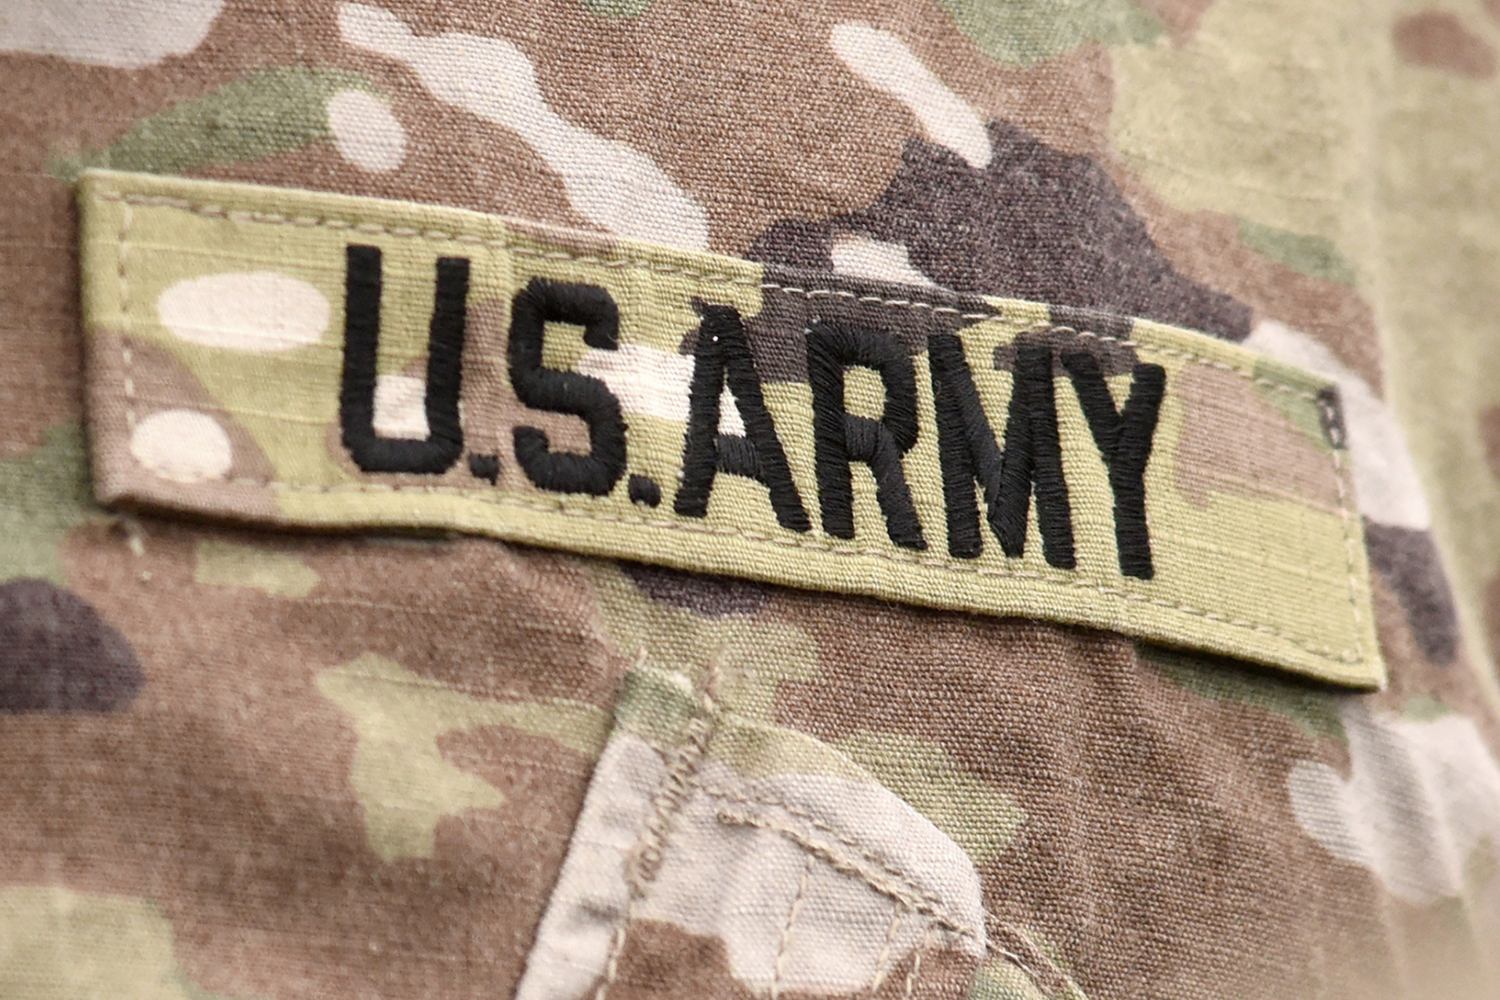 Military camouflage uniform with "U.S. Army" patch